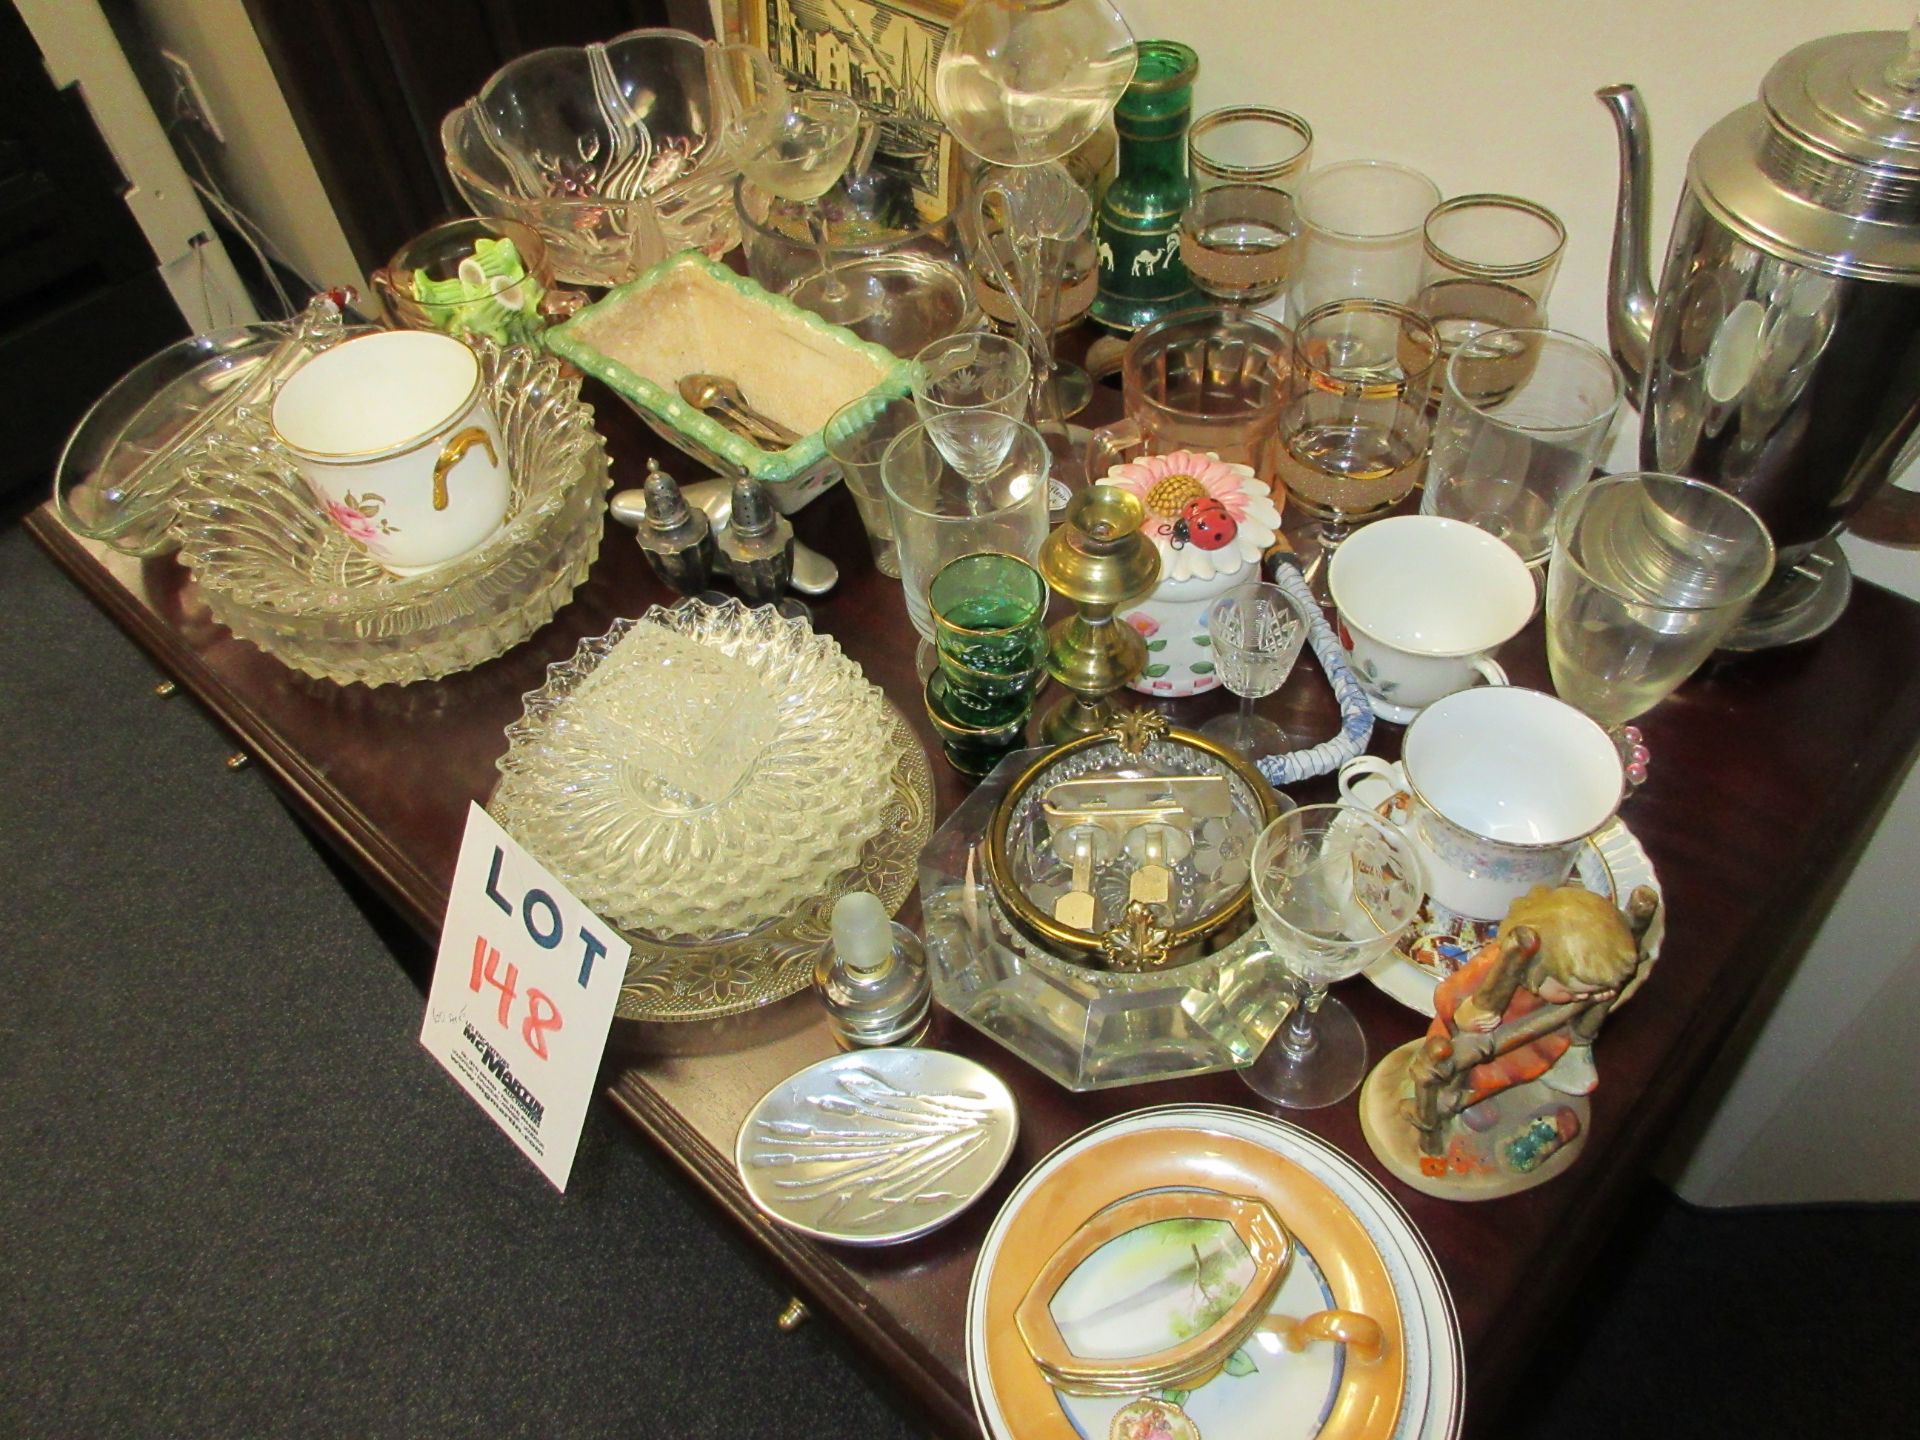 LOT OF ASSORTED ANTIQUE GLASSES,VASES,COLLECTORS DISHWARE, ETC. (60 PIECES) LOCATION : MONTREAL,QC. - Image 3 of 3